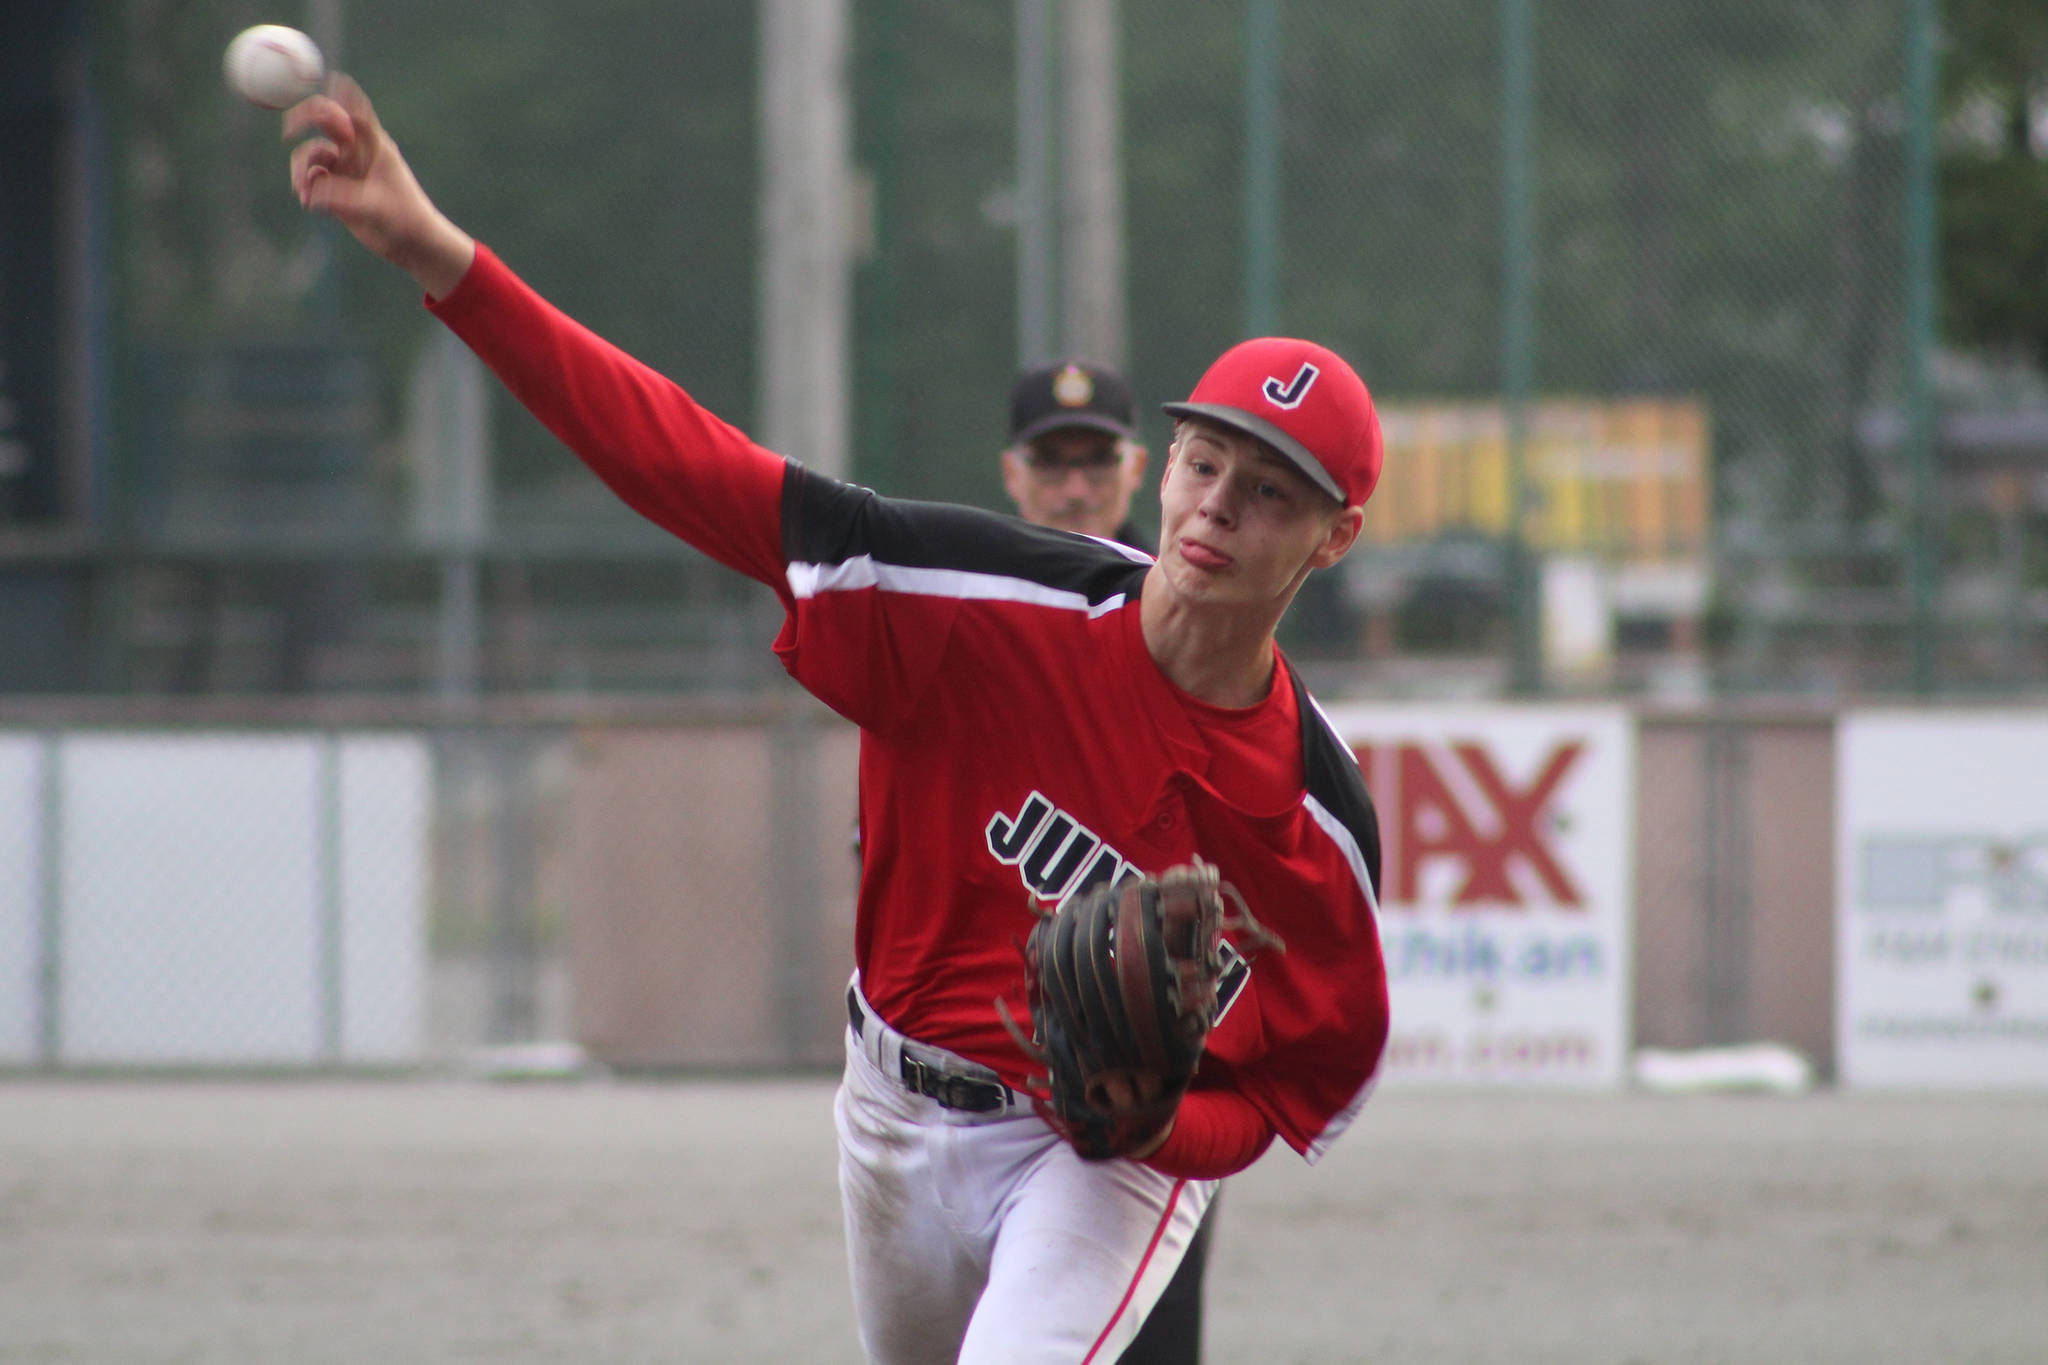 Juneau’s pitching shines at district, state tourneys